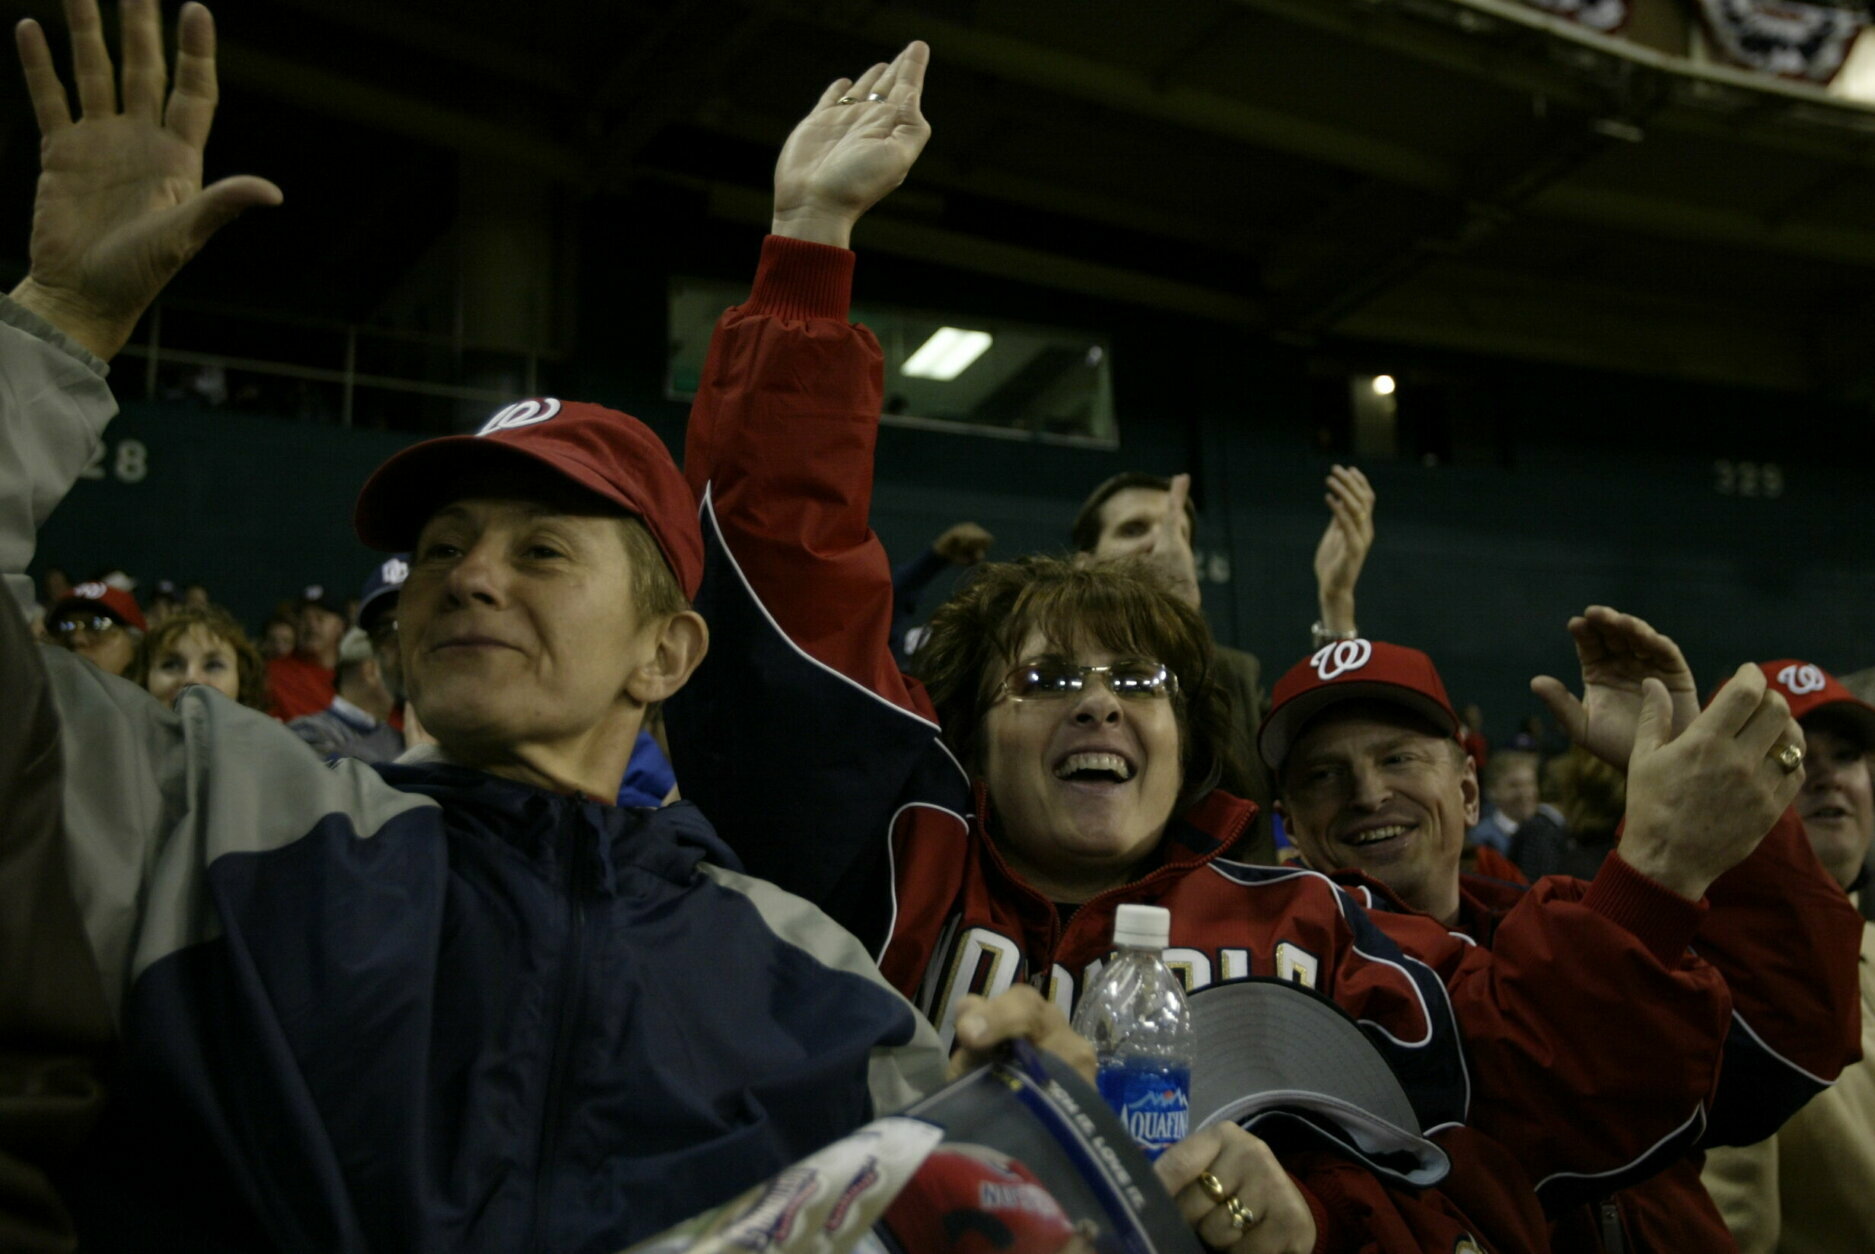 WASHINGTON - APRIL 14:  Unidentified fans of the Washington Nationals react to a home run by Vinny Castilla at RFK Stadium on April 14, 2005 in Washington, D.C. The Nationals defeated the Diamondbacks 0-0. (Photo by Paul Cunningham/MLB via Getty Images)